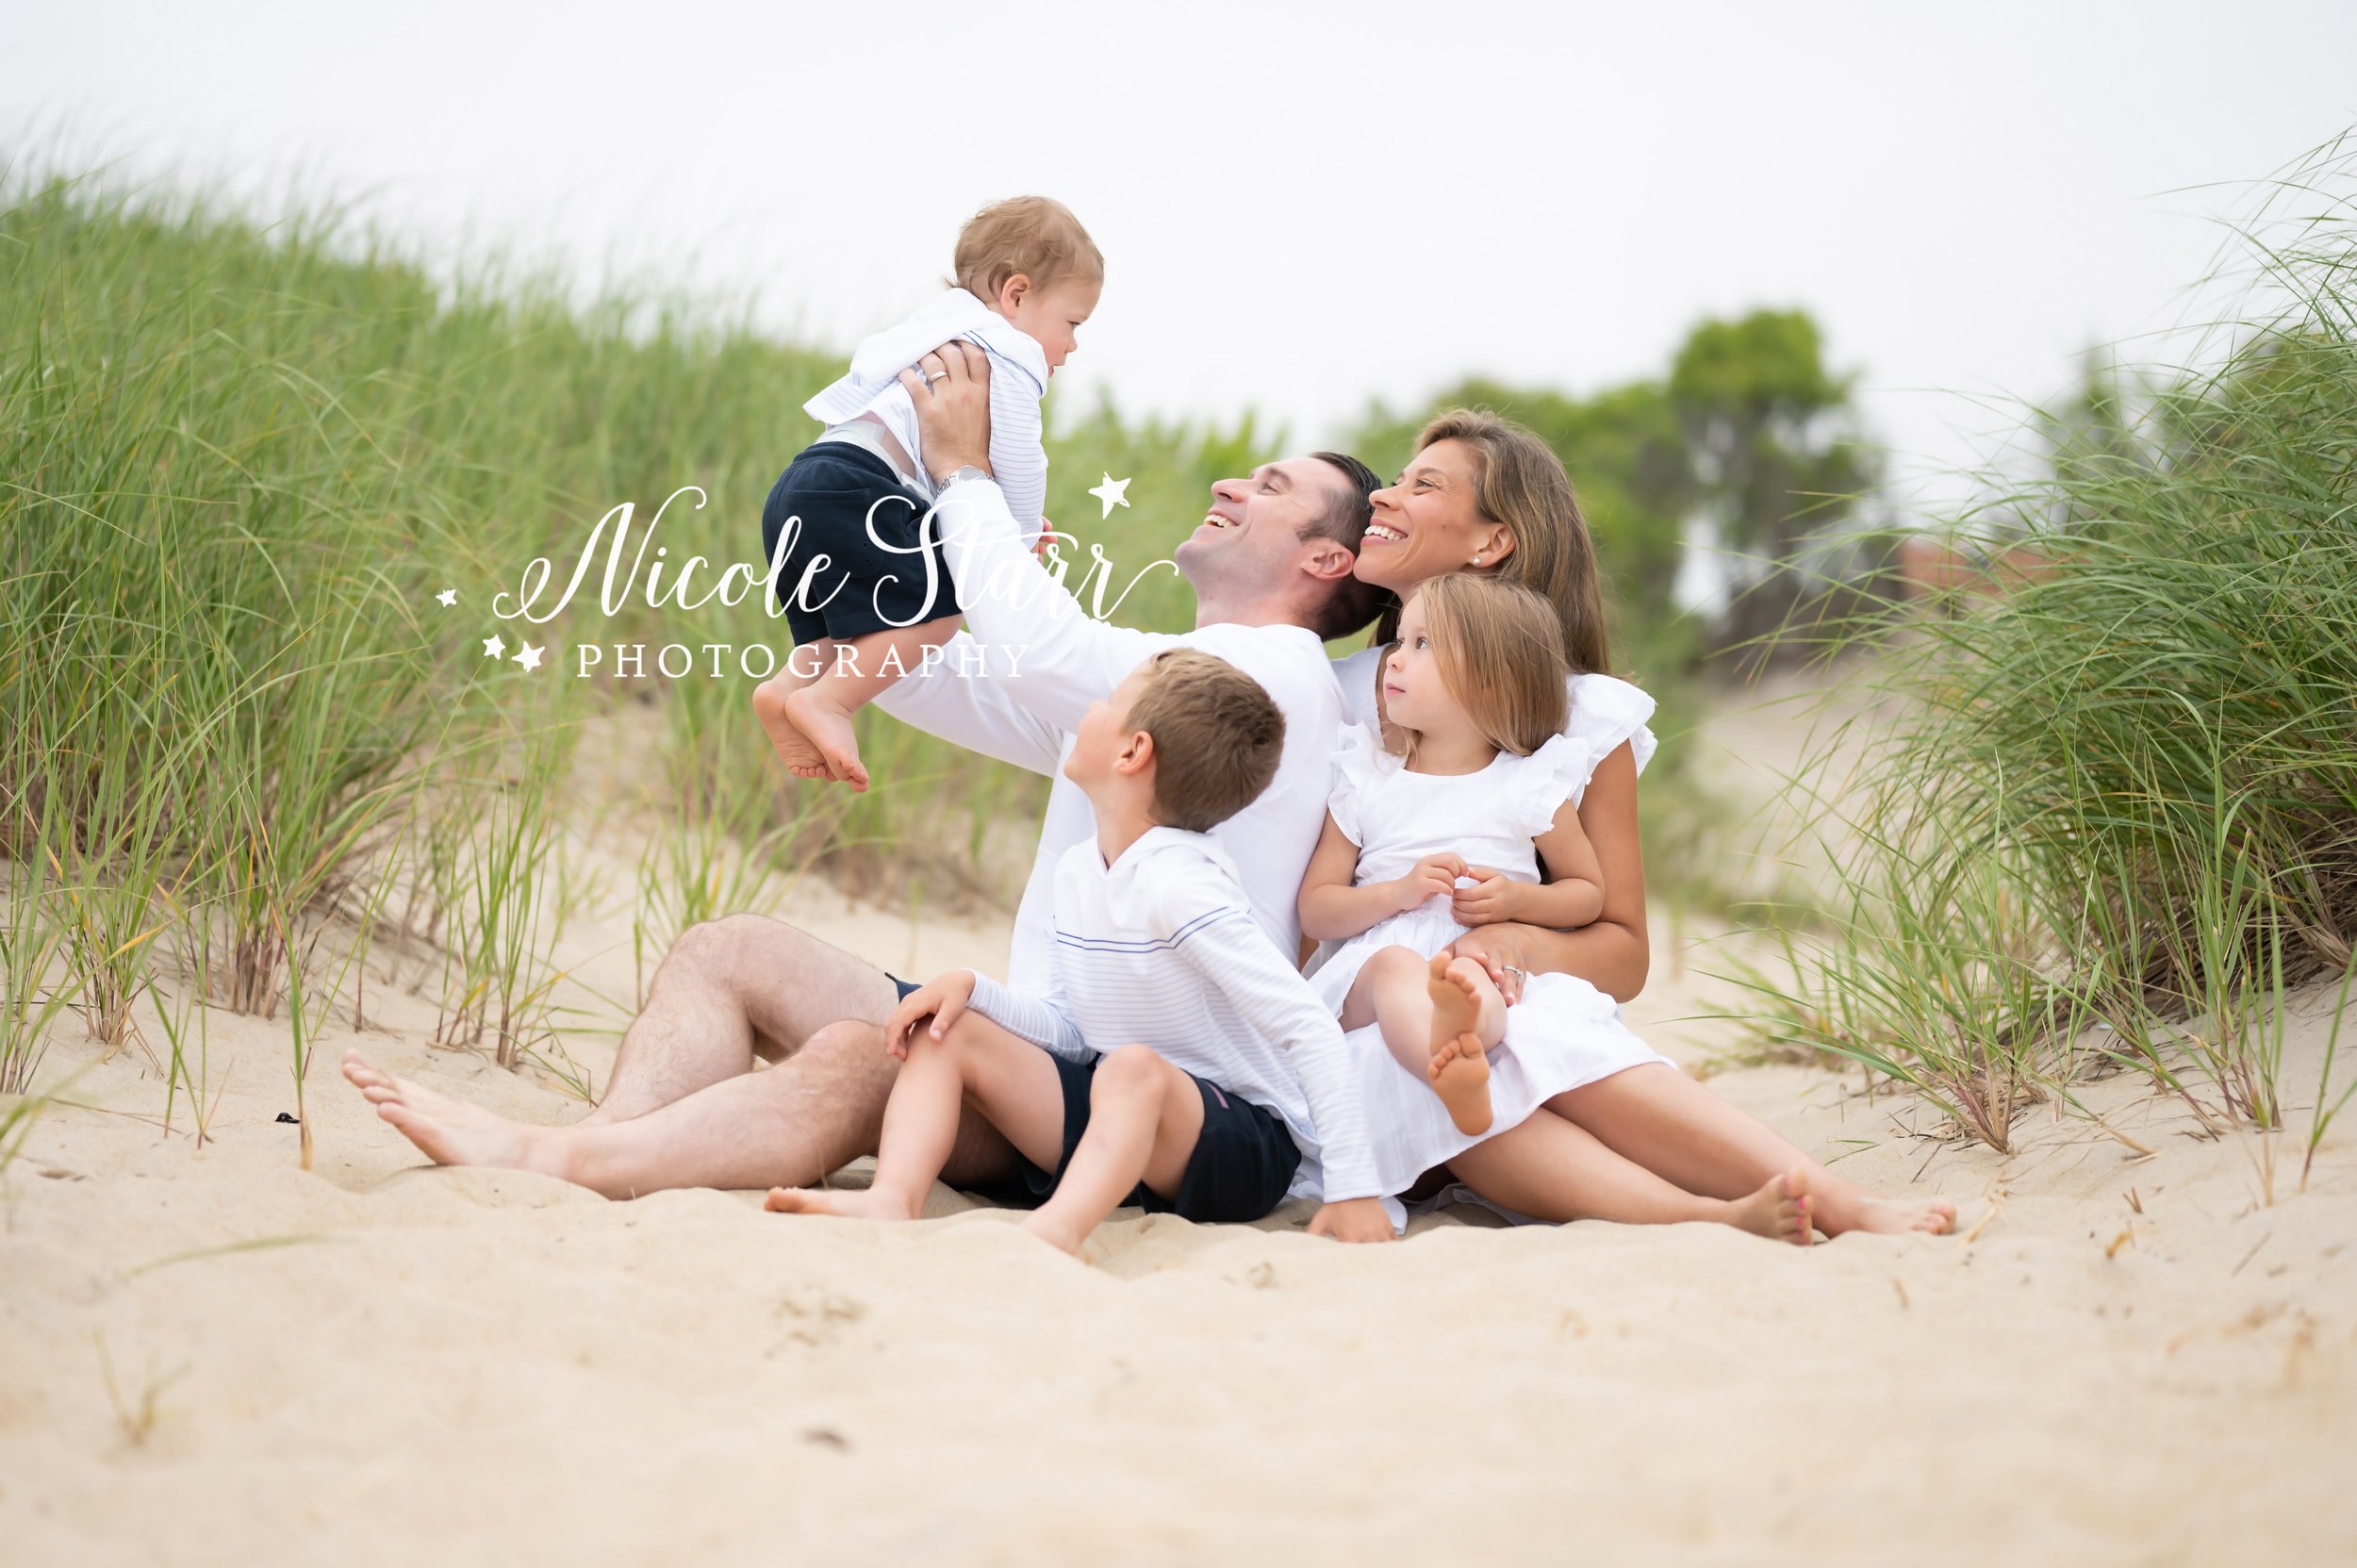 Tips to Organize and Print Your Family's Photo Albums — Saratoga Springs  Baby Photographer, Nicole Starr Photography